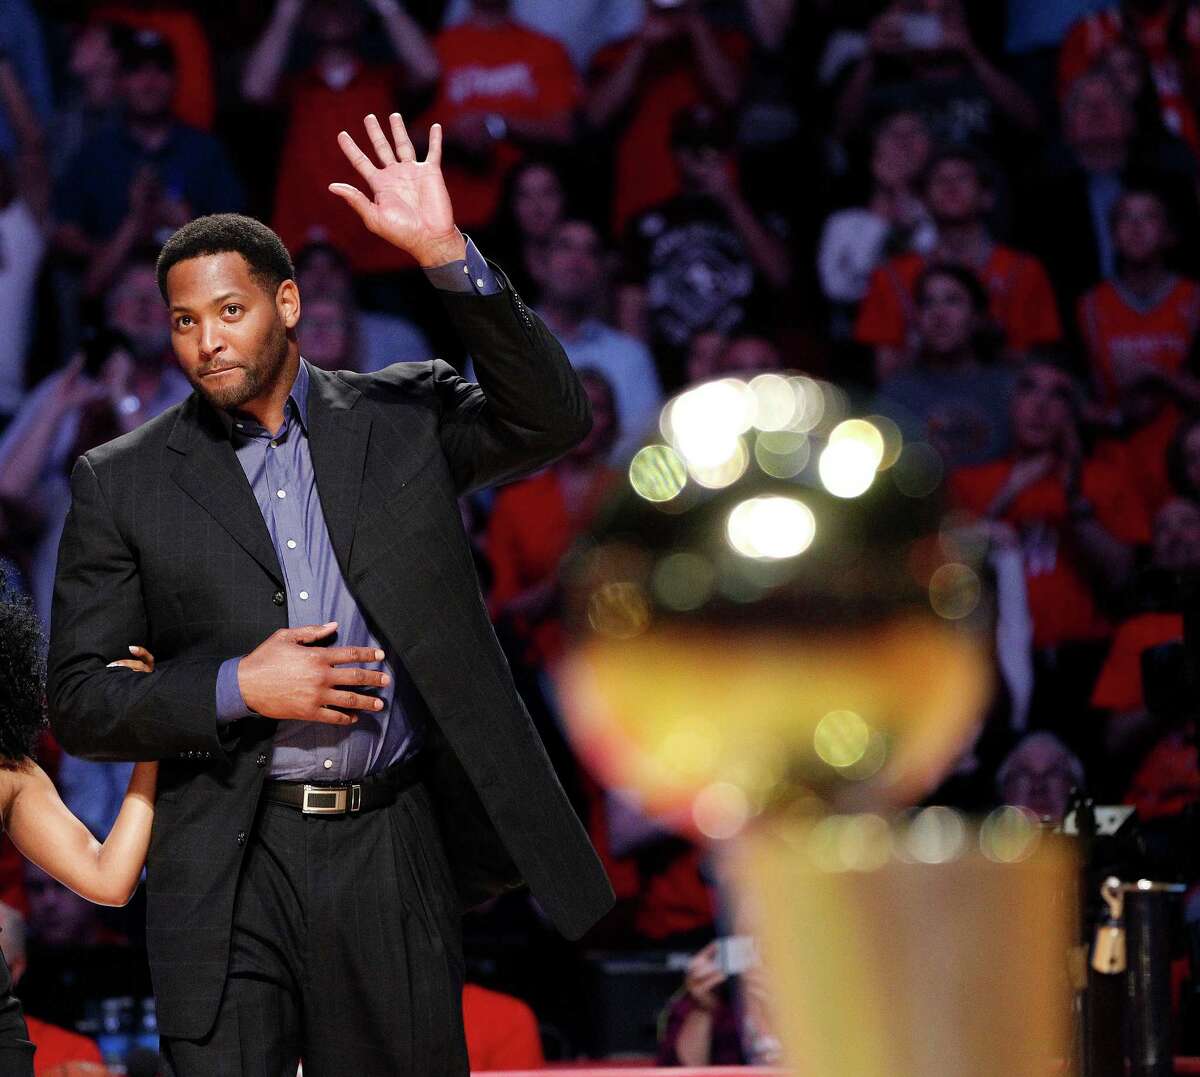 Former Houston Rockets Robert Horry was escorted to center court during the 20th Anniversary of the 1995 Houston Rockets championship during a halftime ceremony of an NBA game at Toyota Center on March 19, 2015, in Houston.